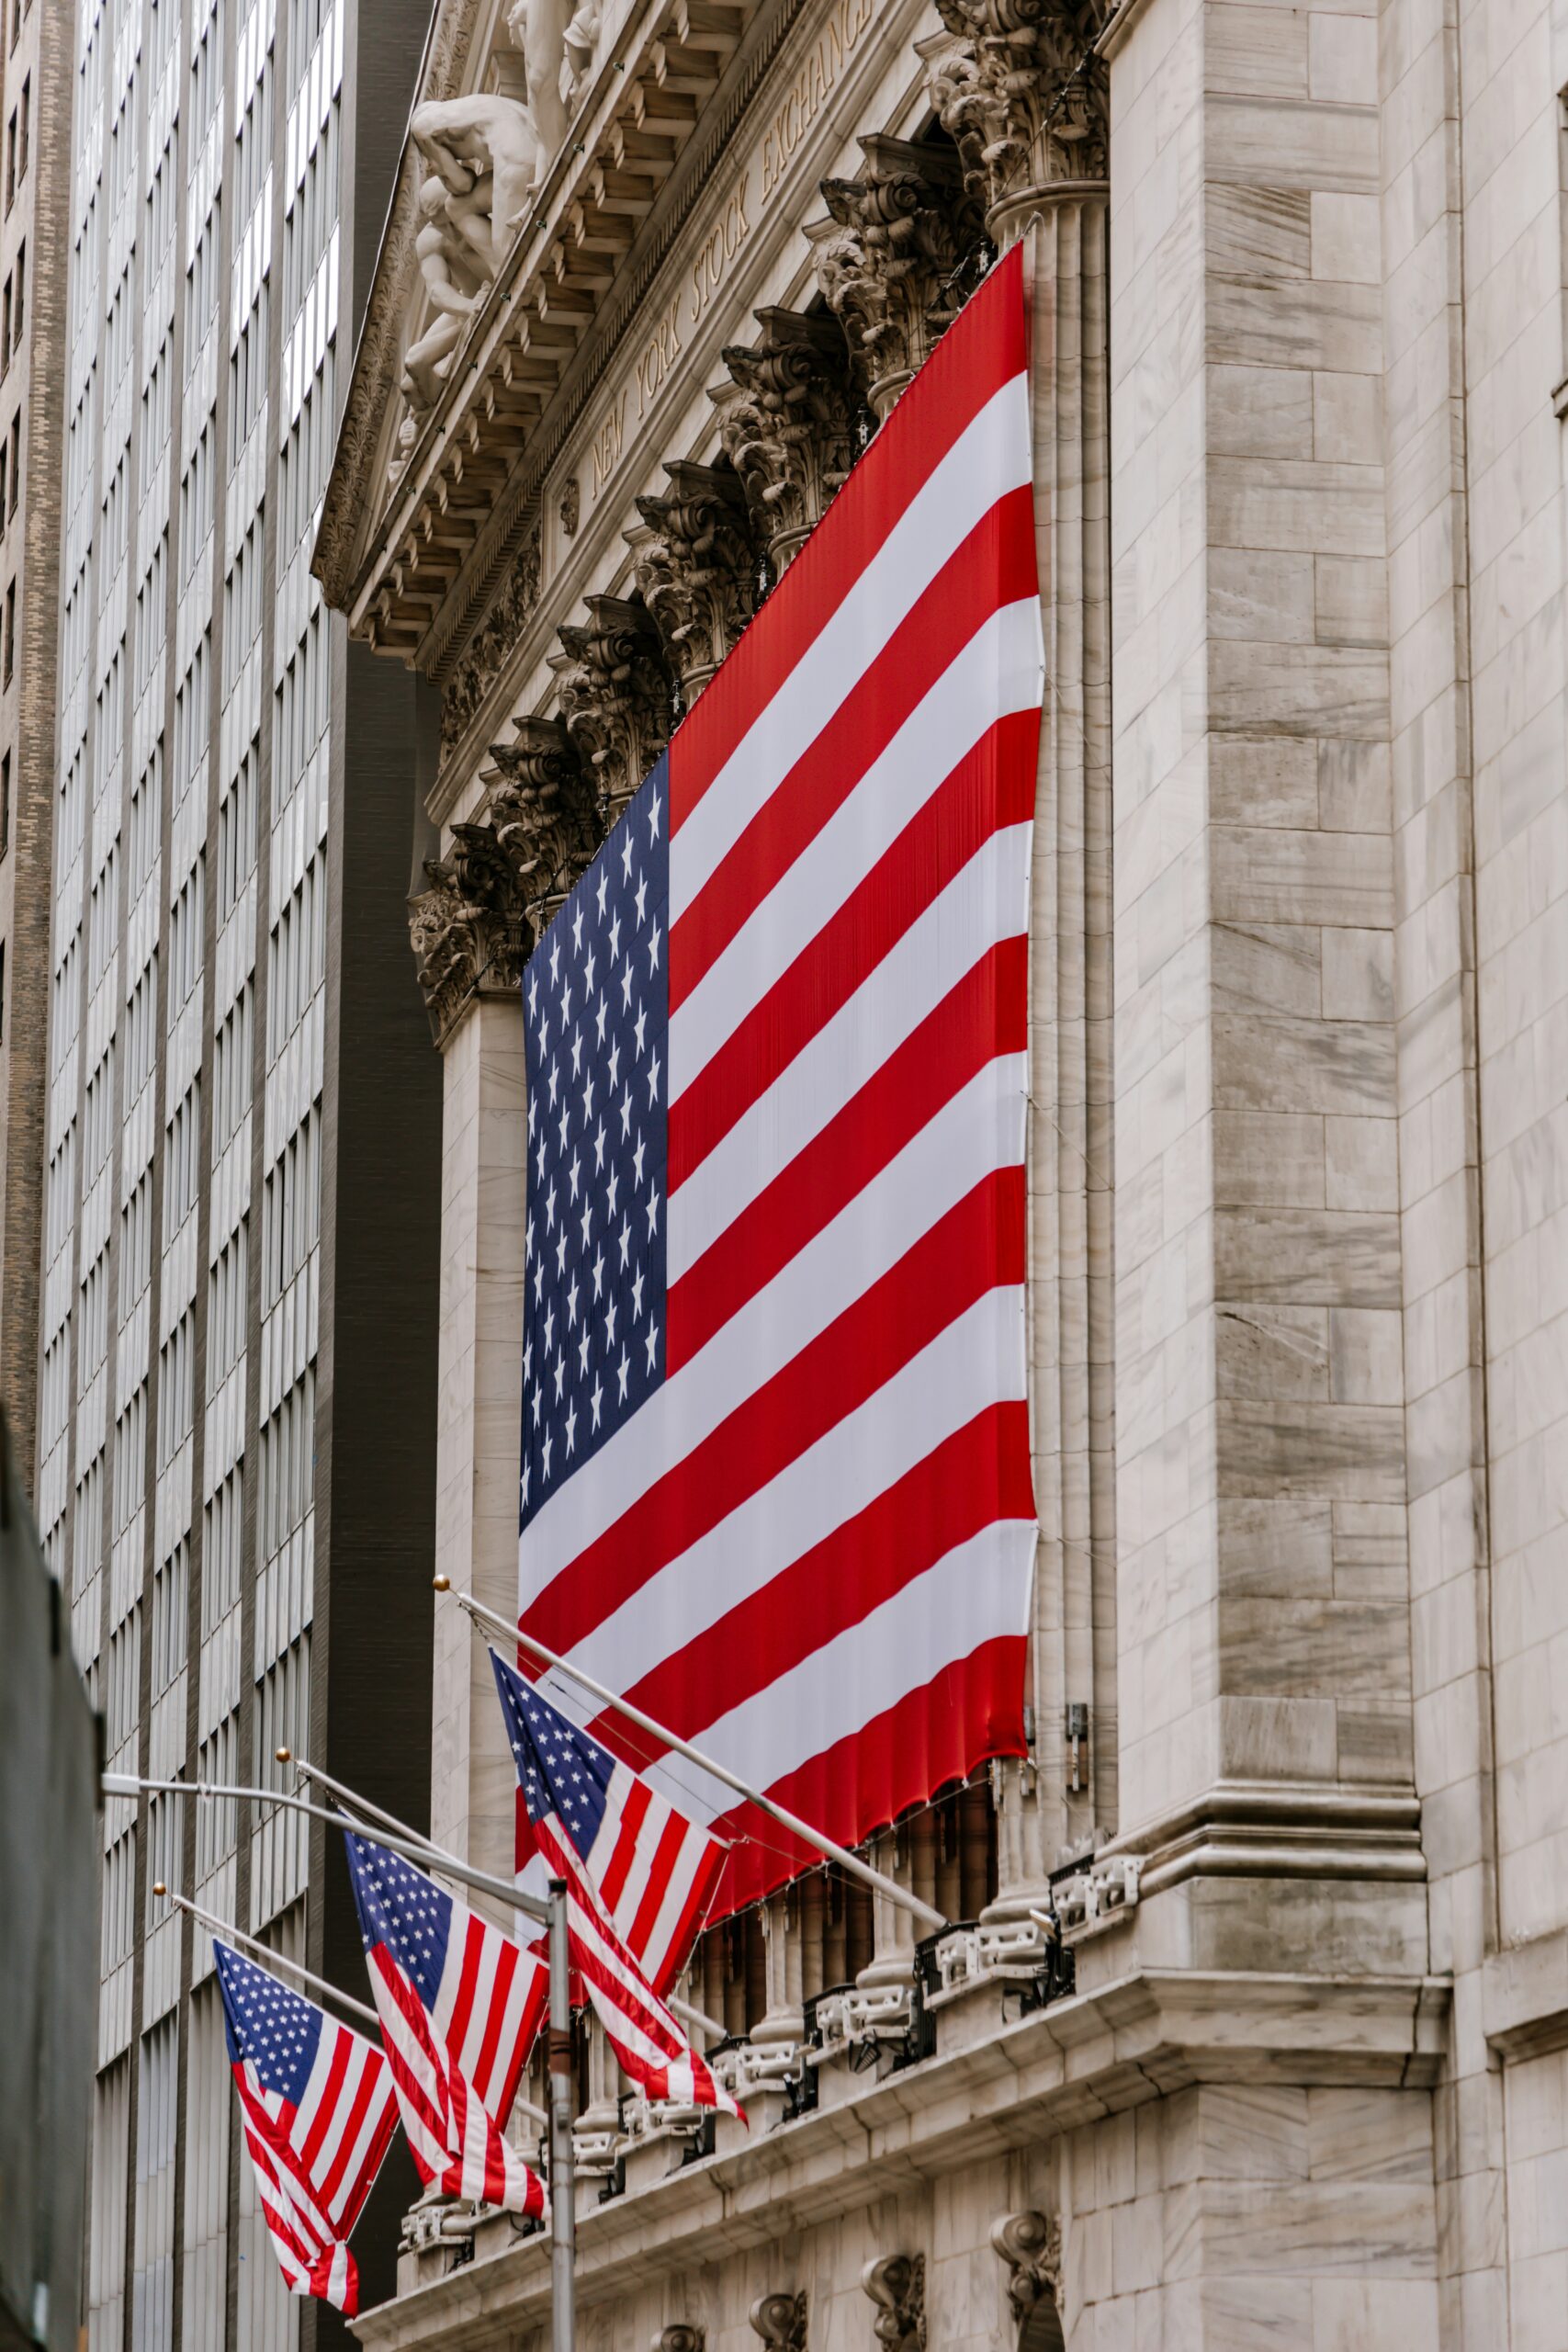 American flags hanging outside the stock exchange